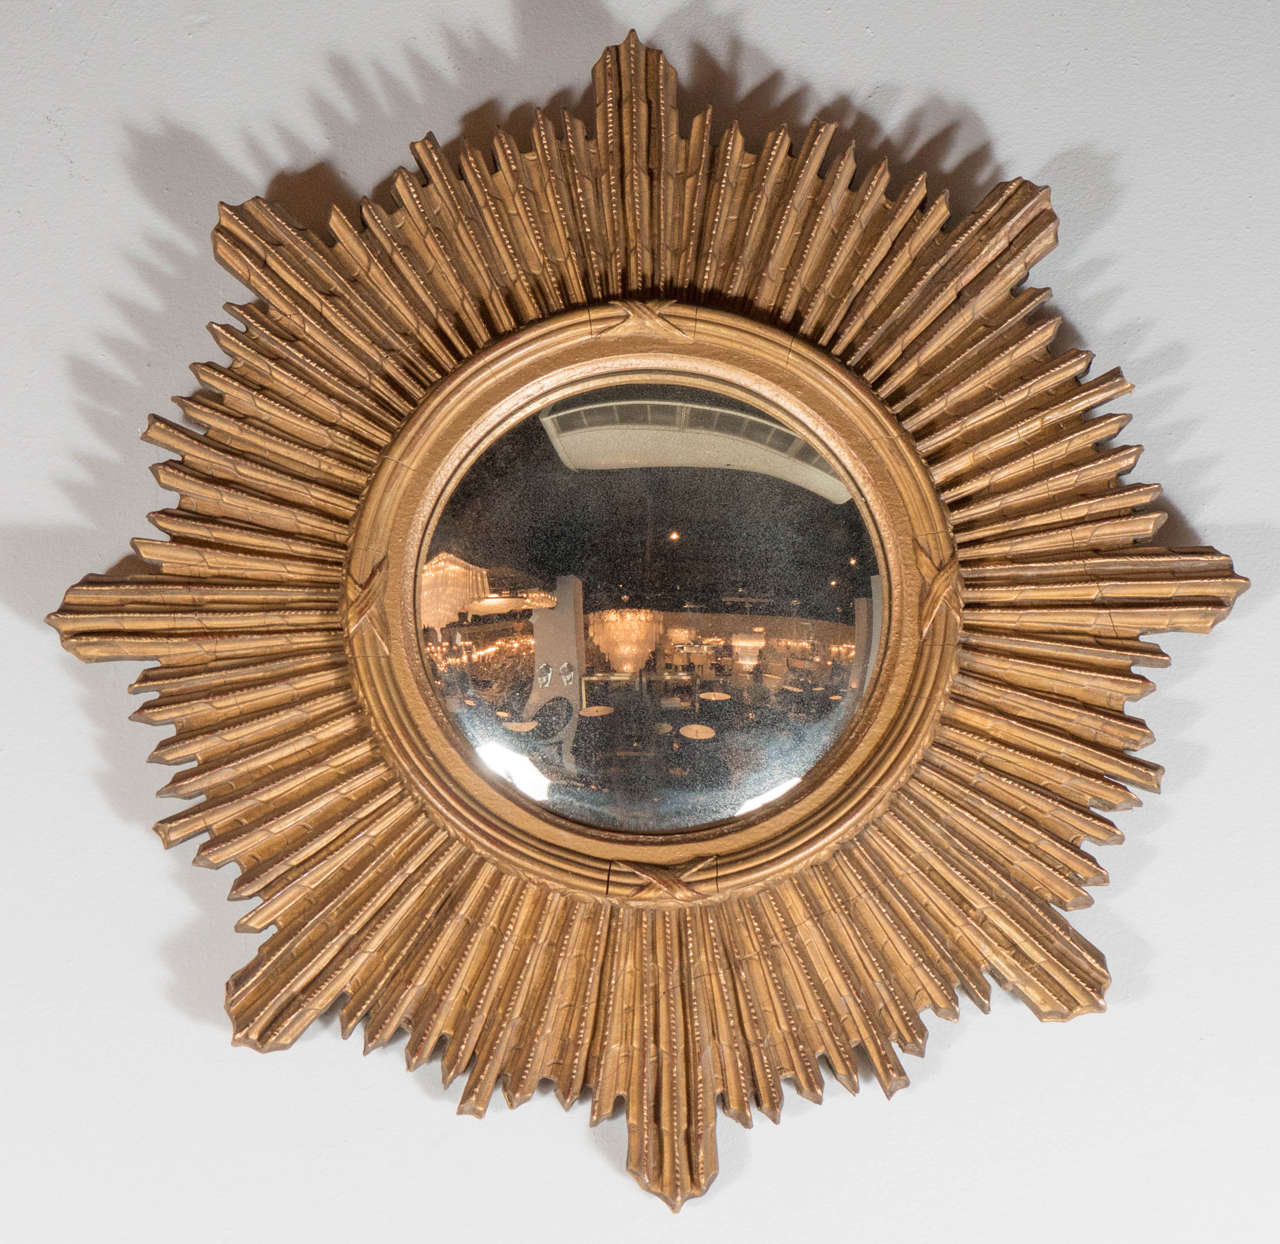 This exceptional Art Deco mirror features a sumptuous gilded starburst design with a convex antique mercury glass mirror. Great stylized Art Deco detailing.